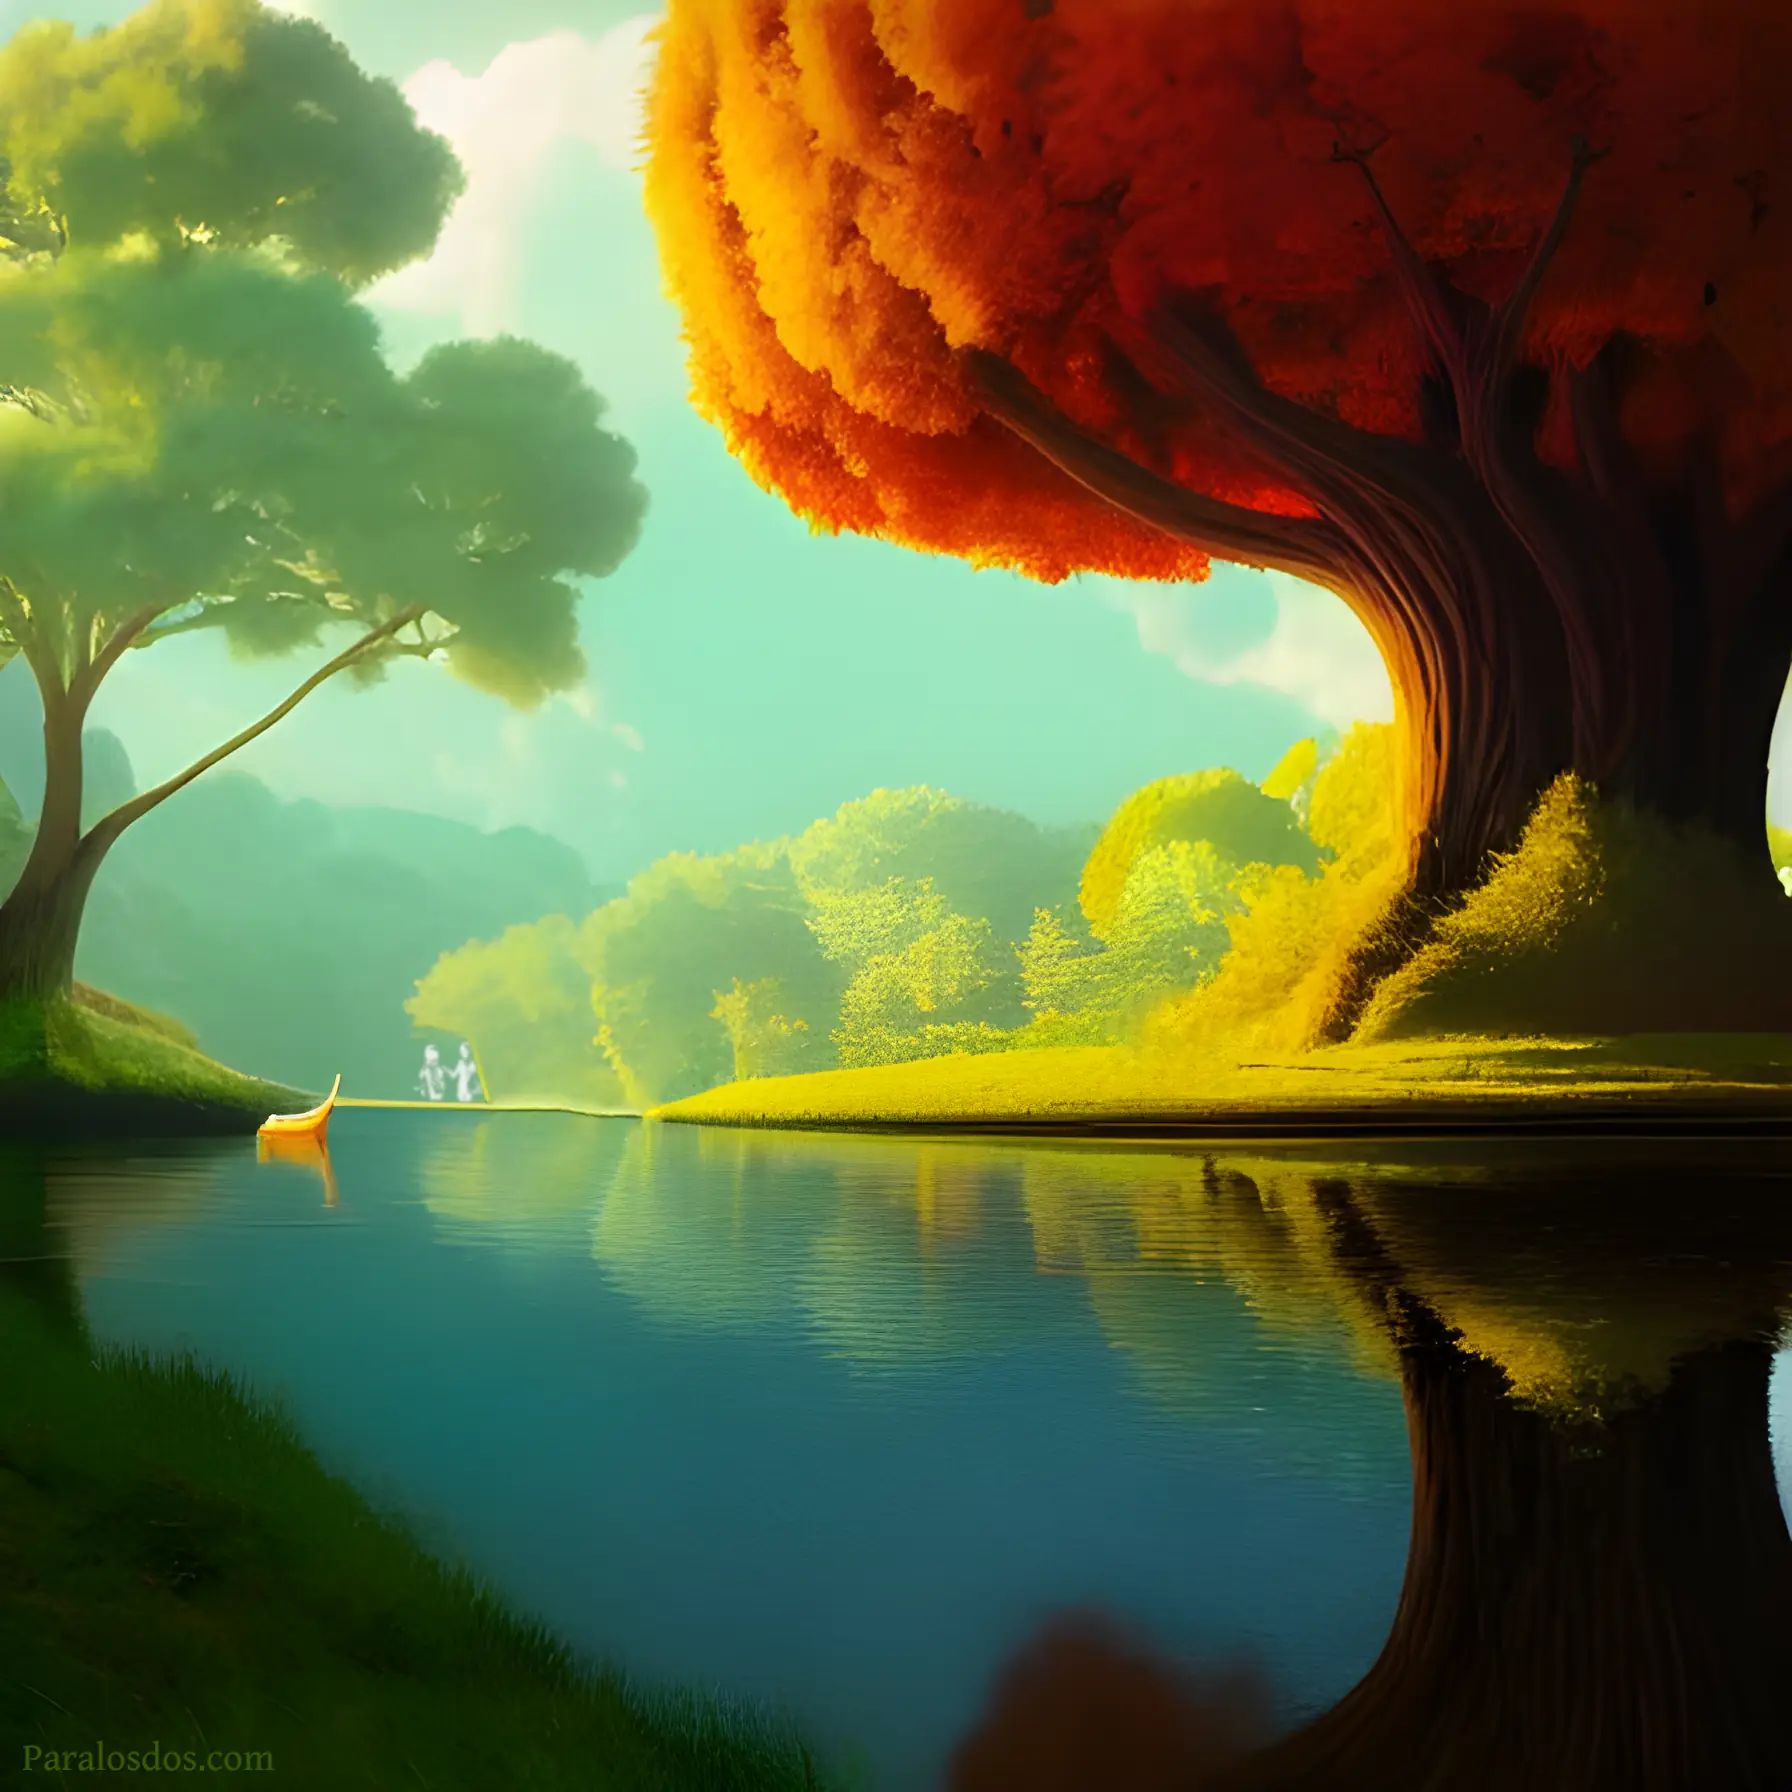 An artistic rendering of a peaceful lake on a beautiful day.